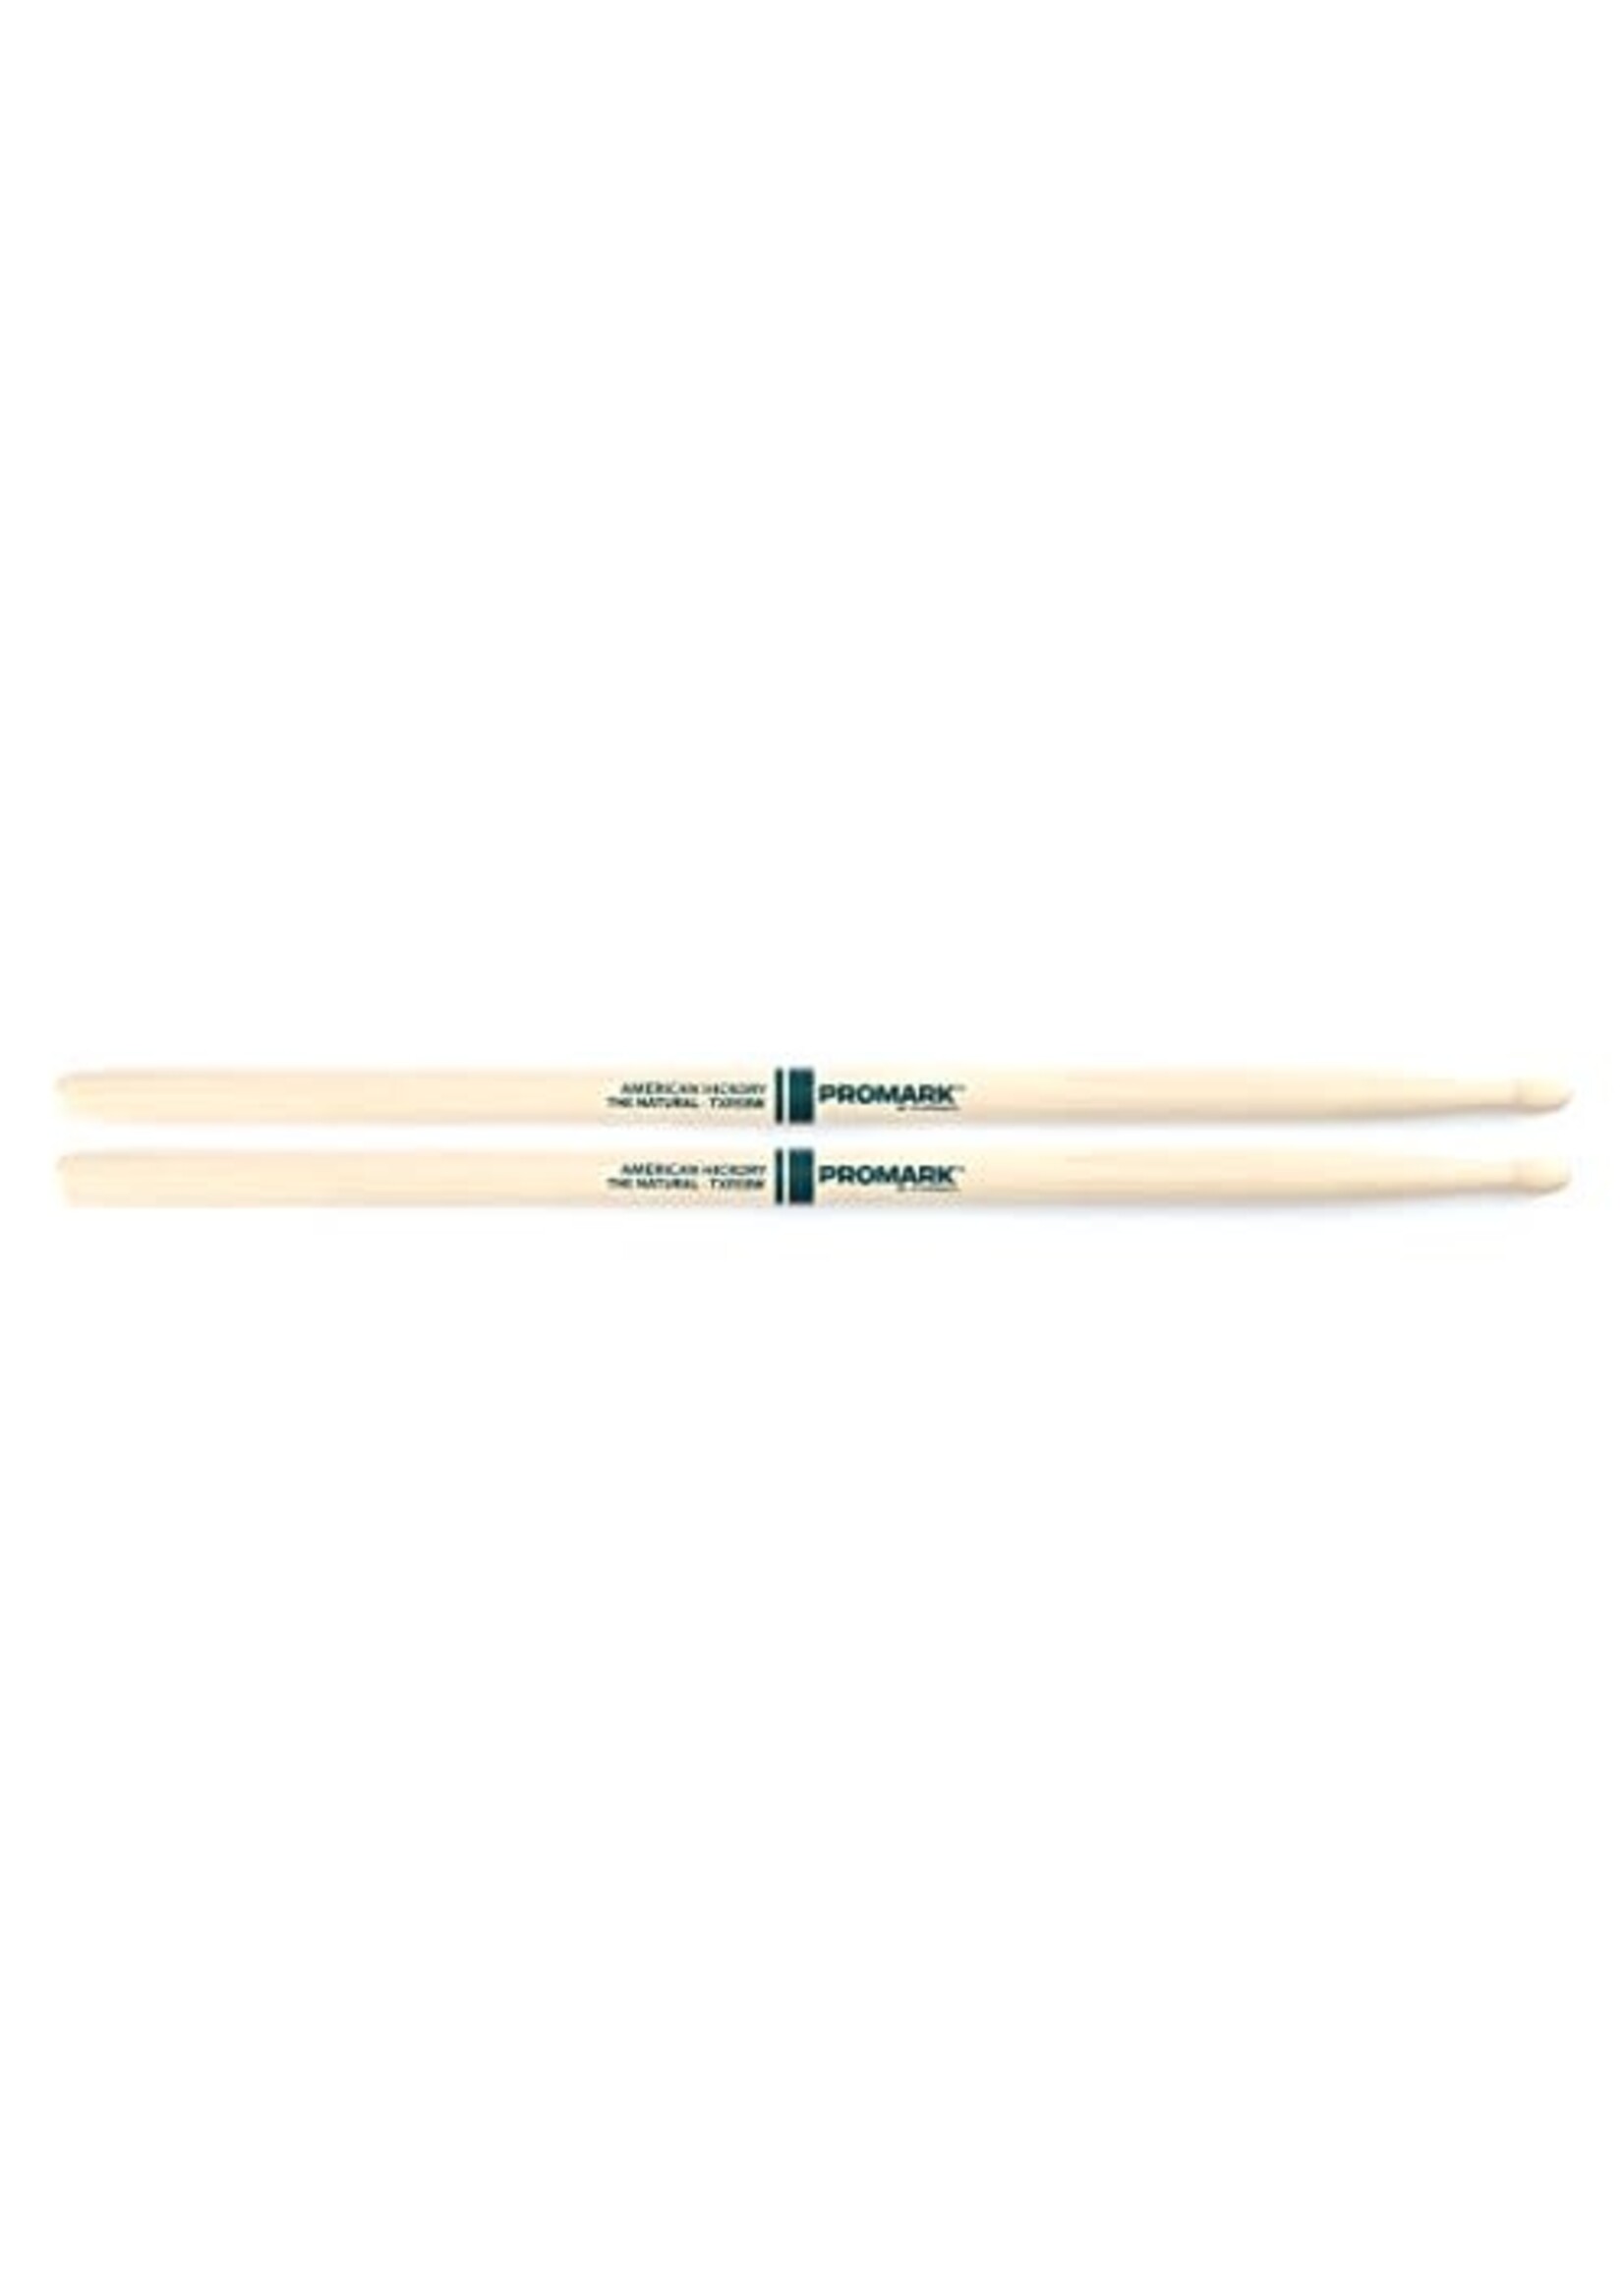 Promark HICKORY 5B - "THE NATURAL